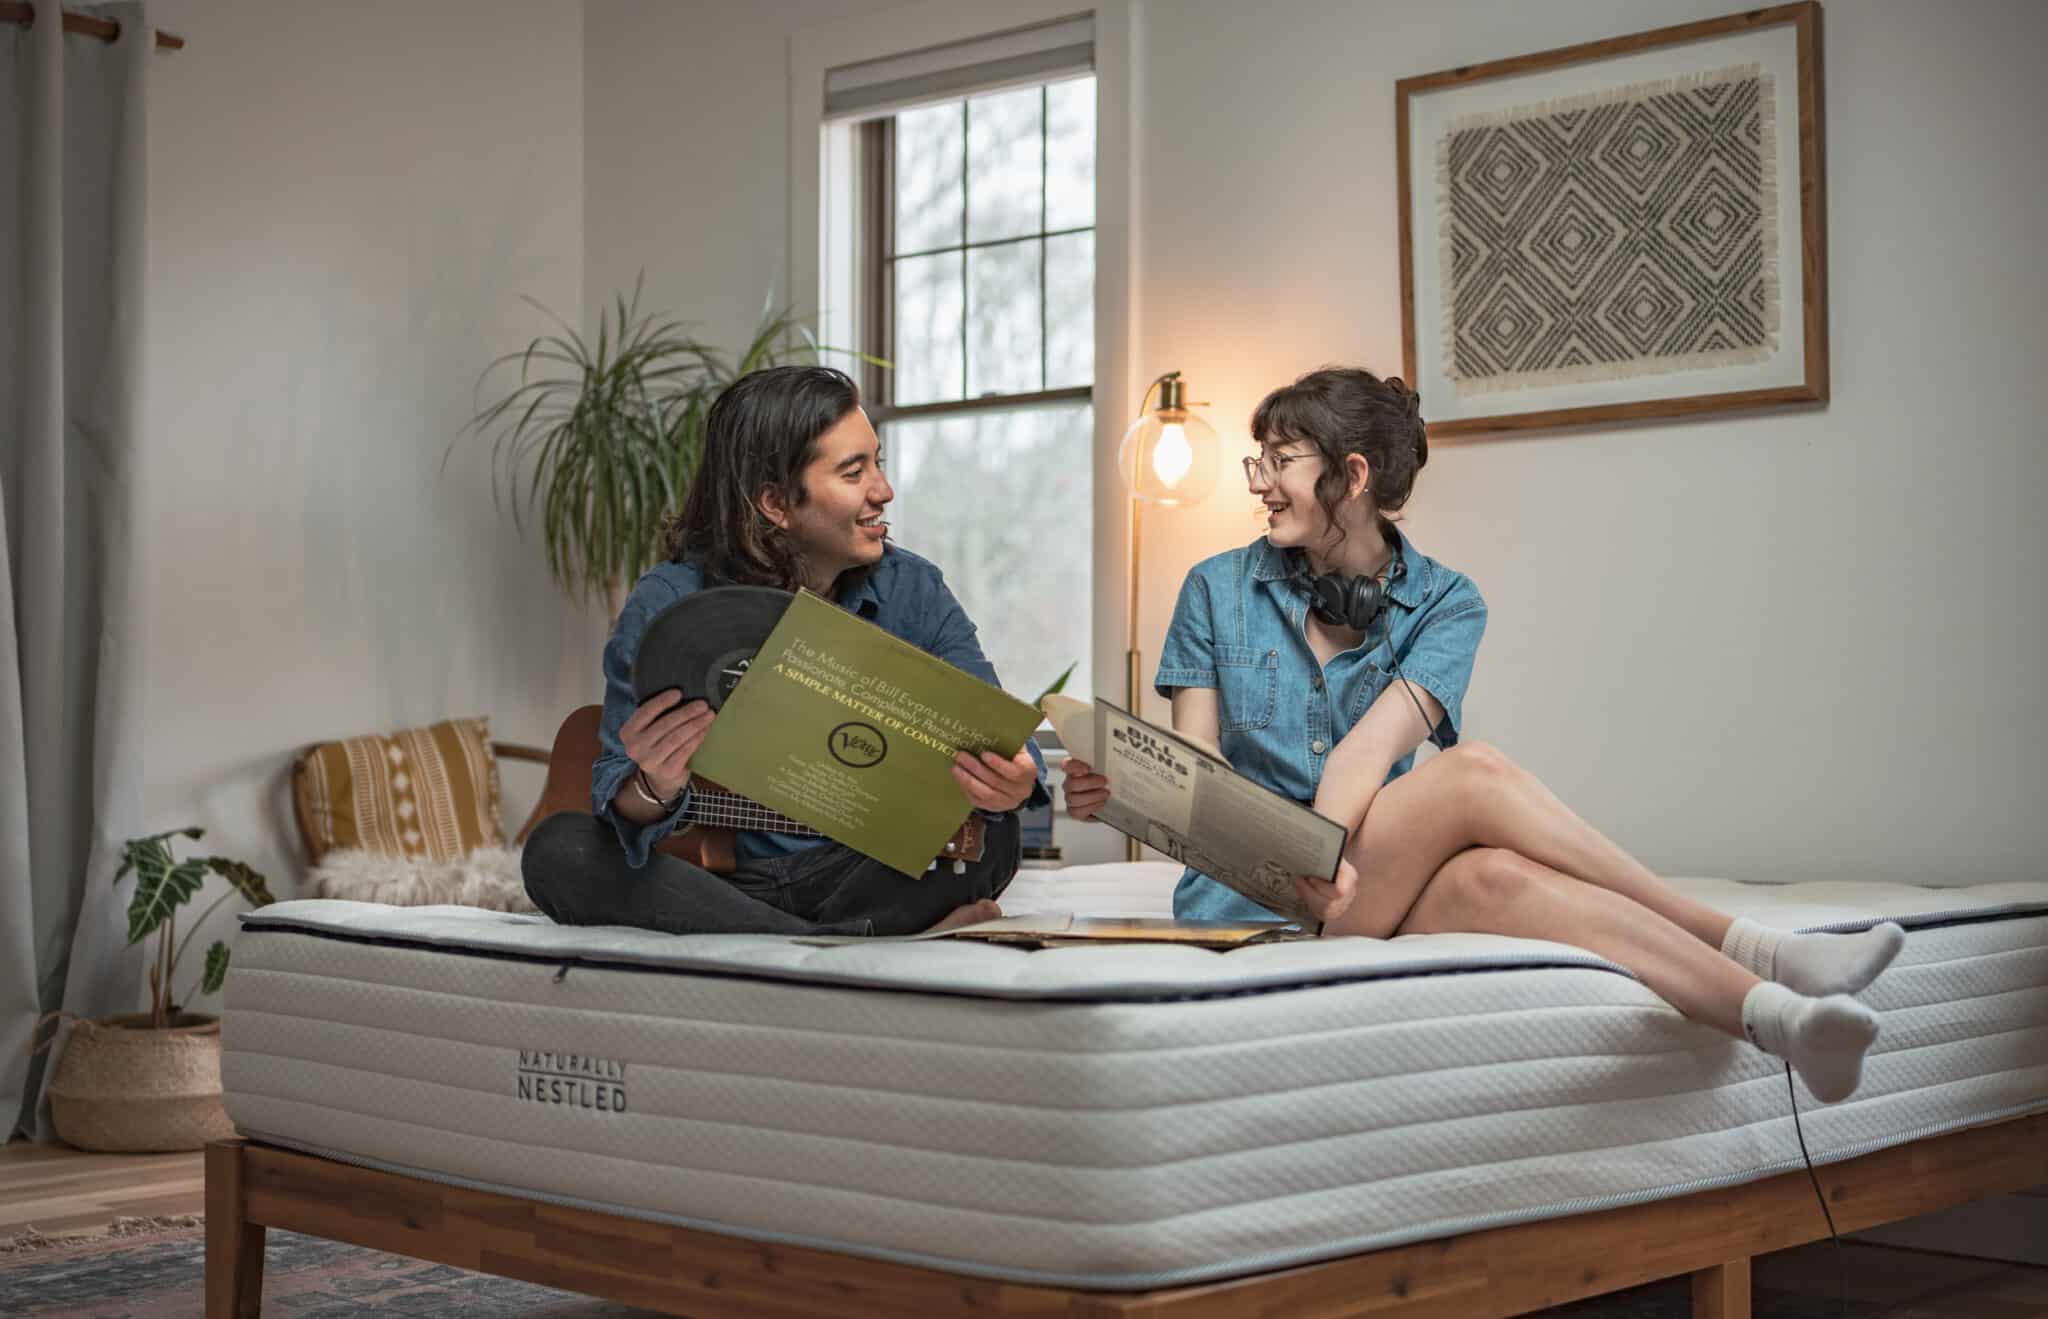 A couple looking at music records while sitting on a bare Naturally Nestled mattress